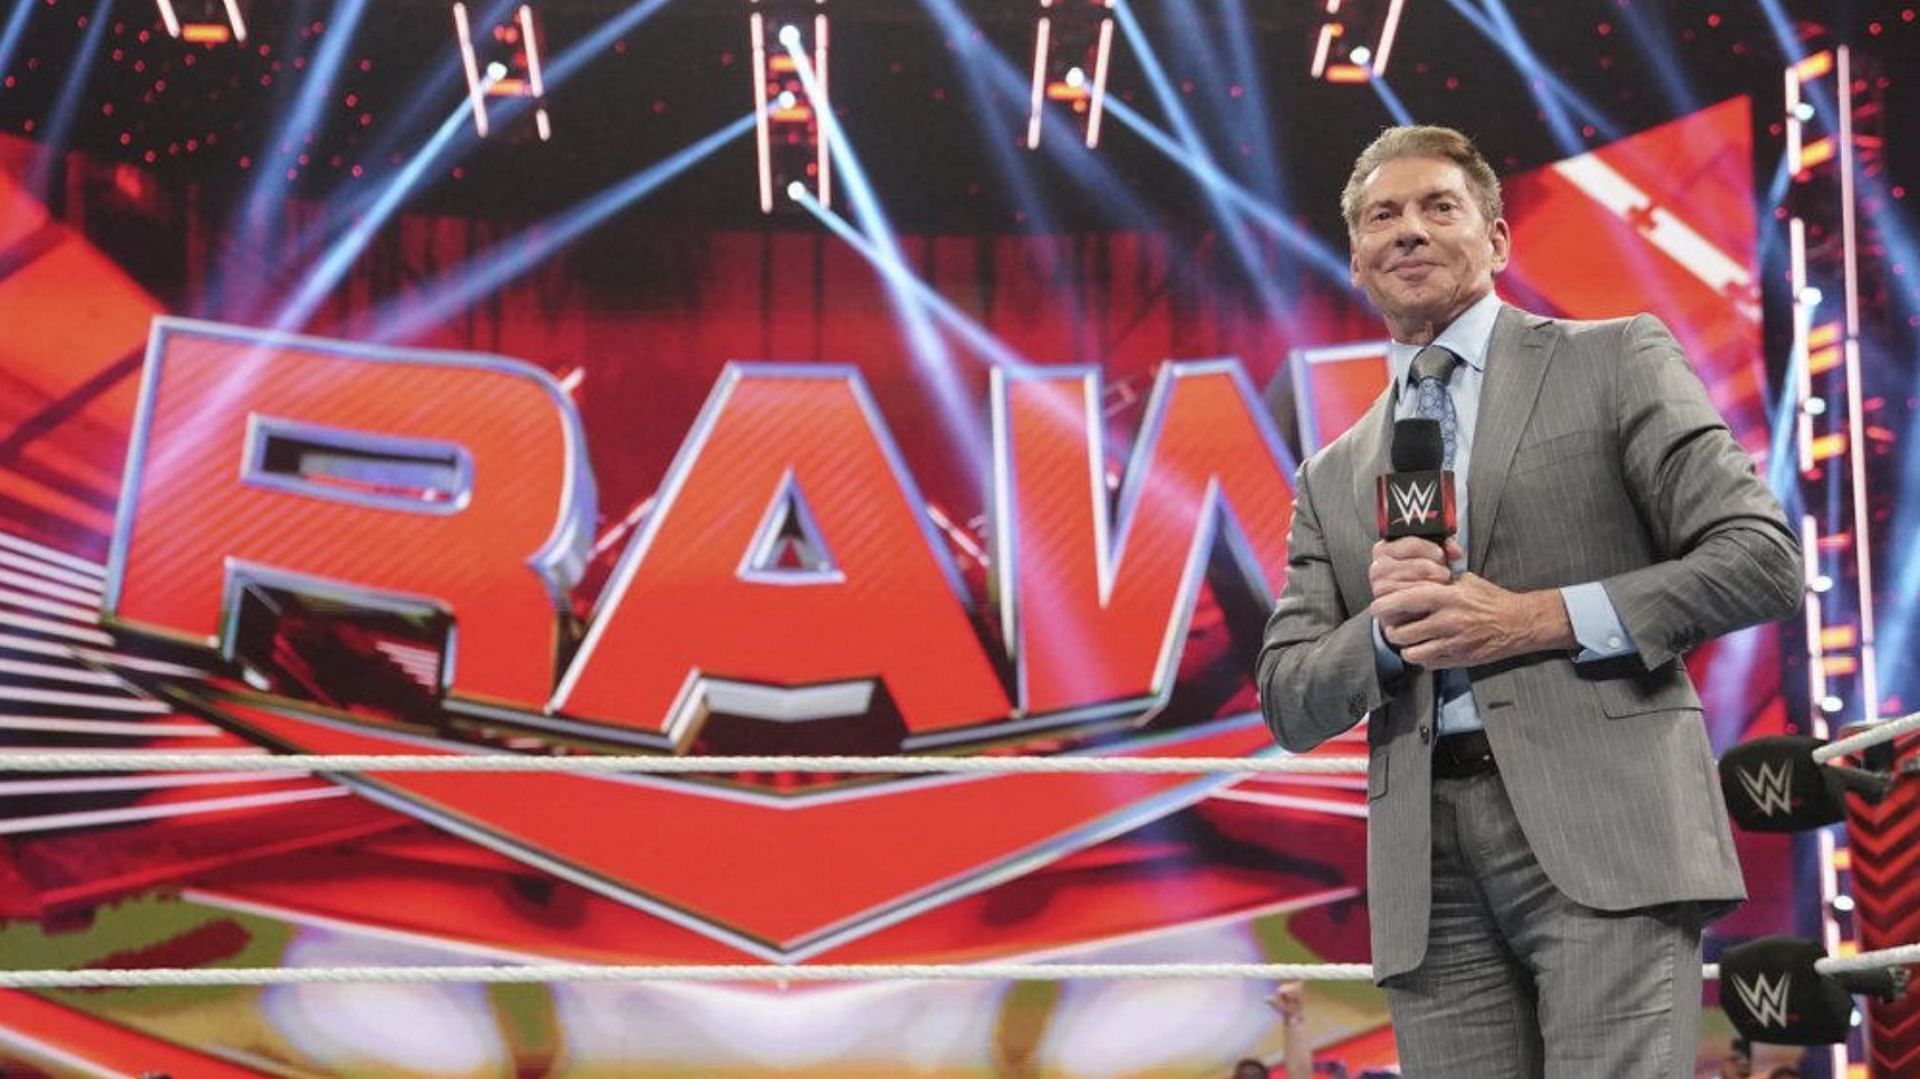 Vince McMahon made an appearance on RAW this week!